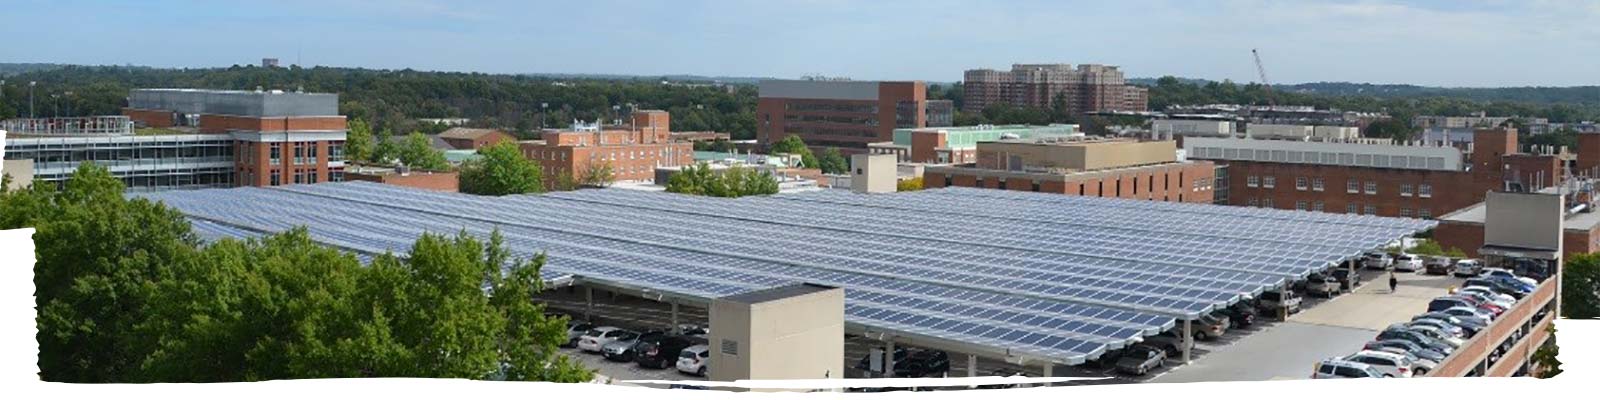 DC metro transit area installed a large-scale solar power project